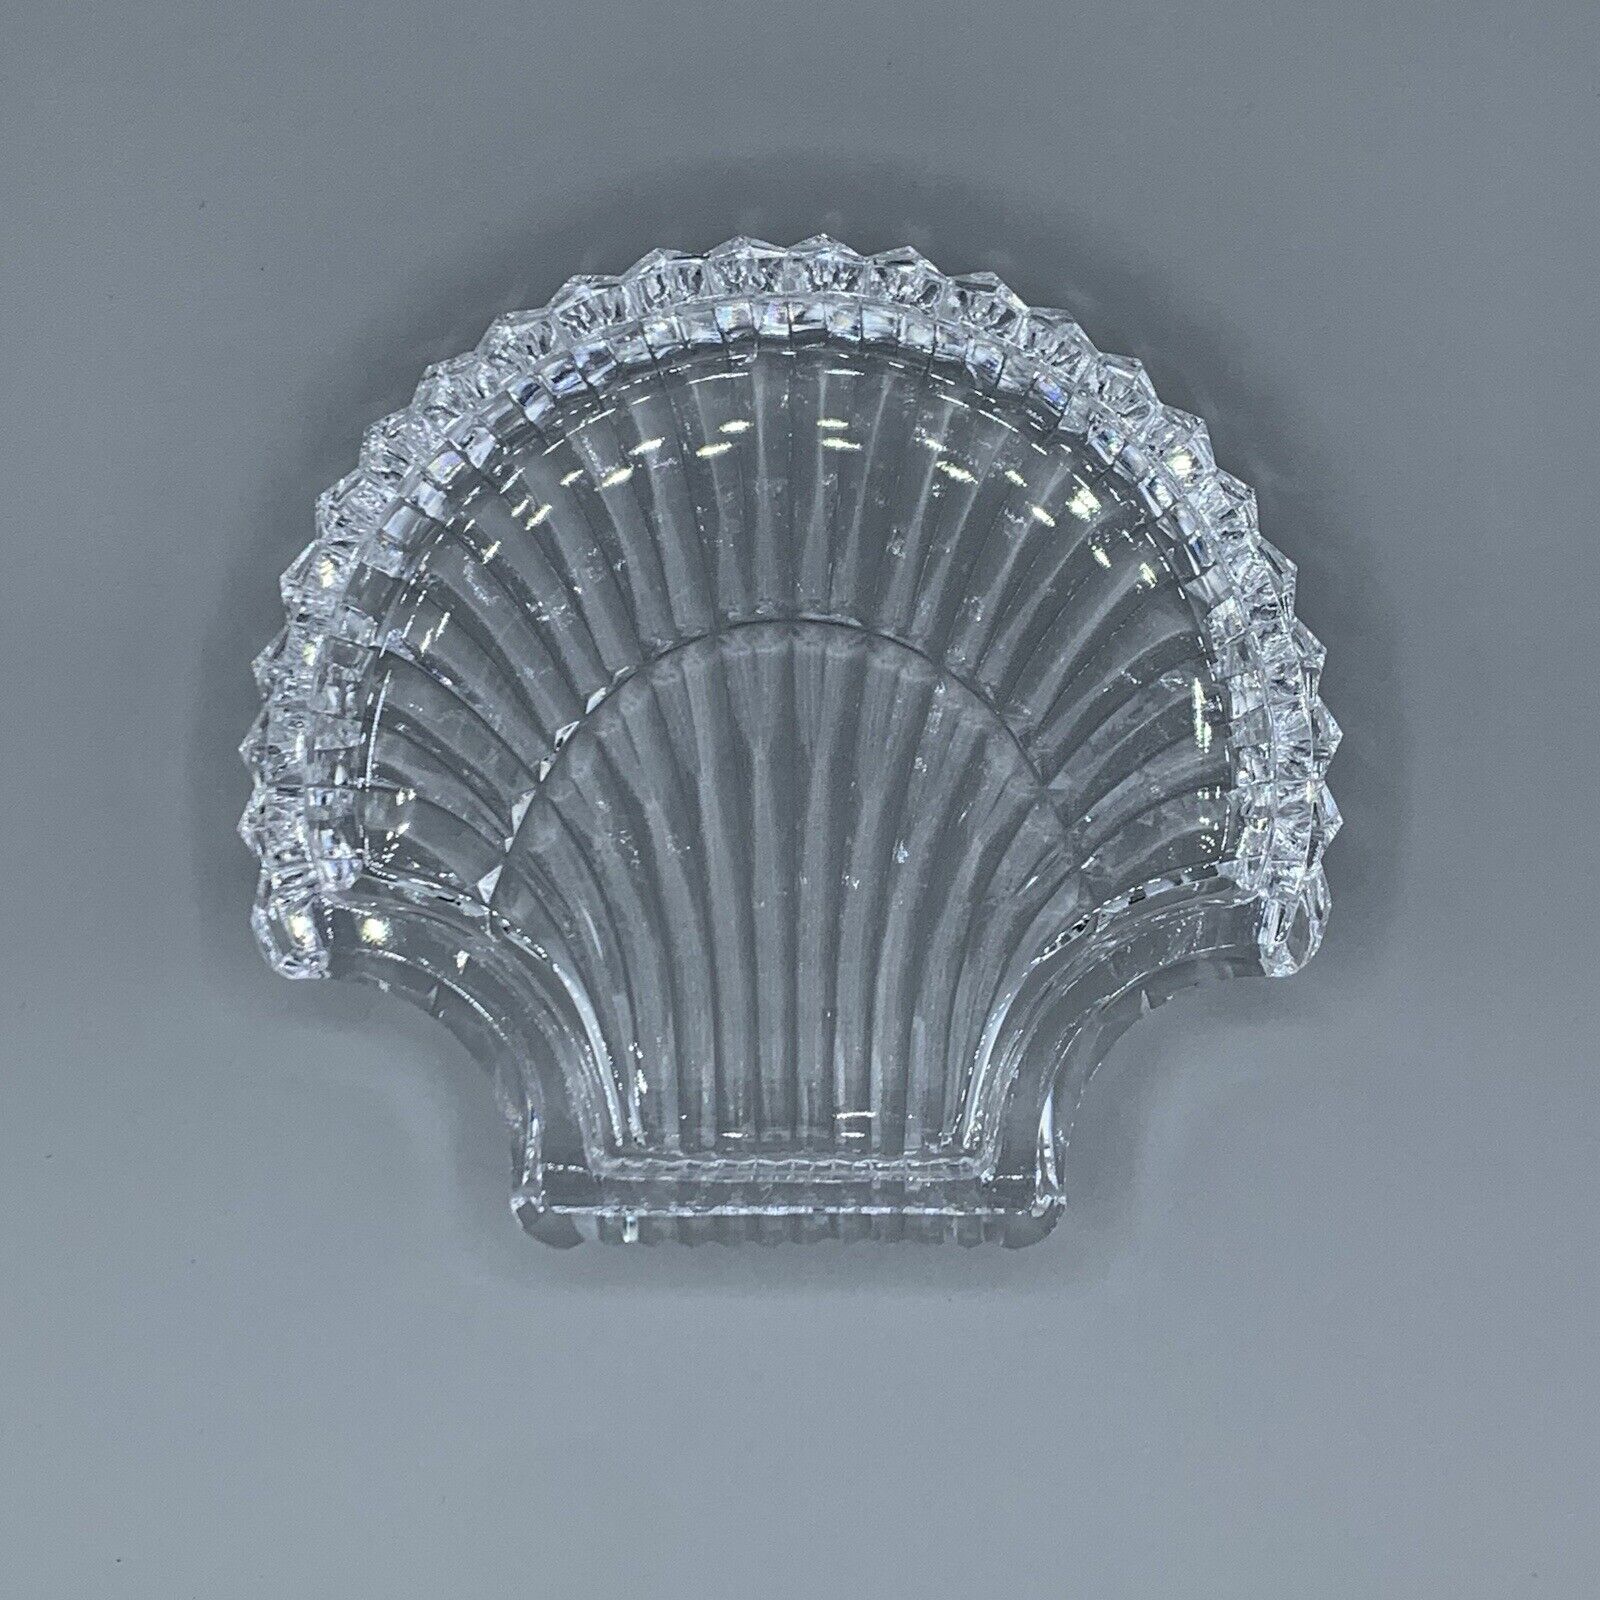 Waterford Crystal Glass Scallop Shell Dish Paperweight Vanity Dresser Dish